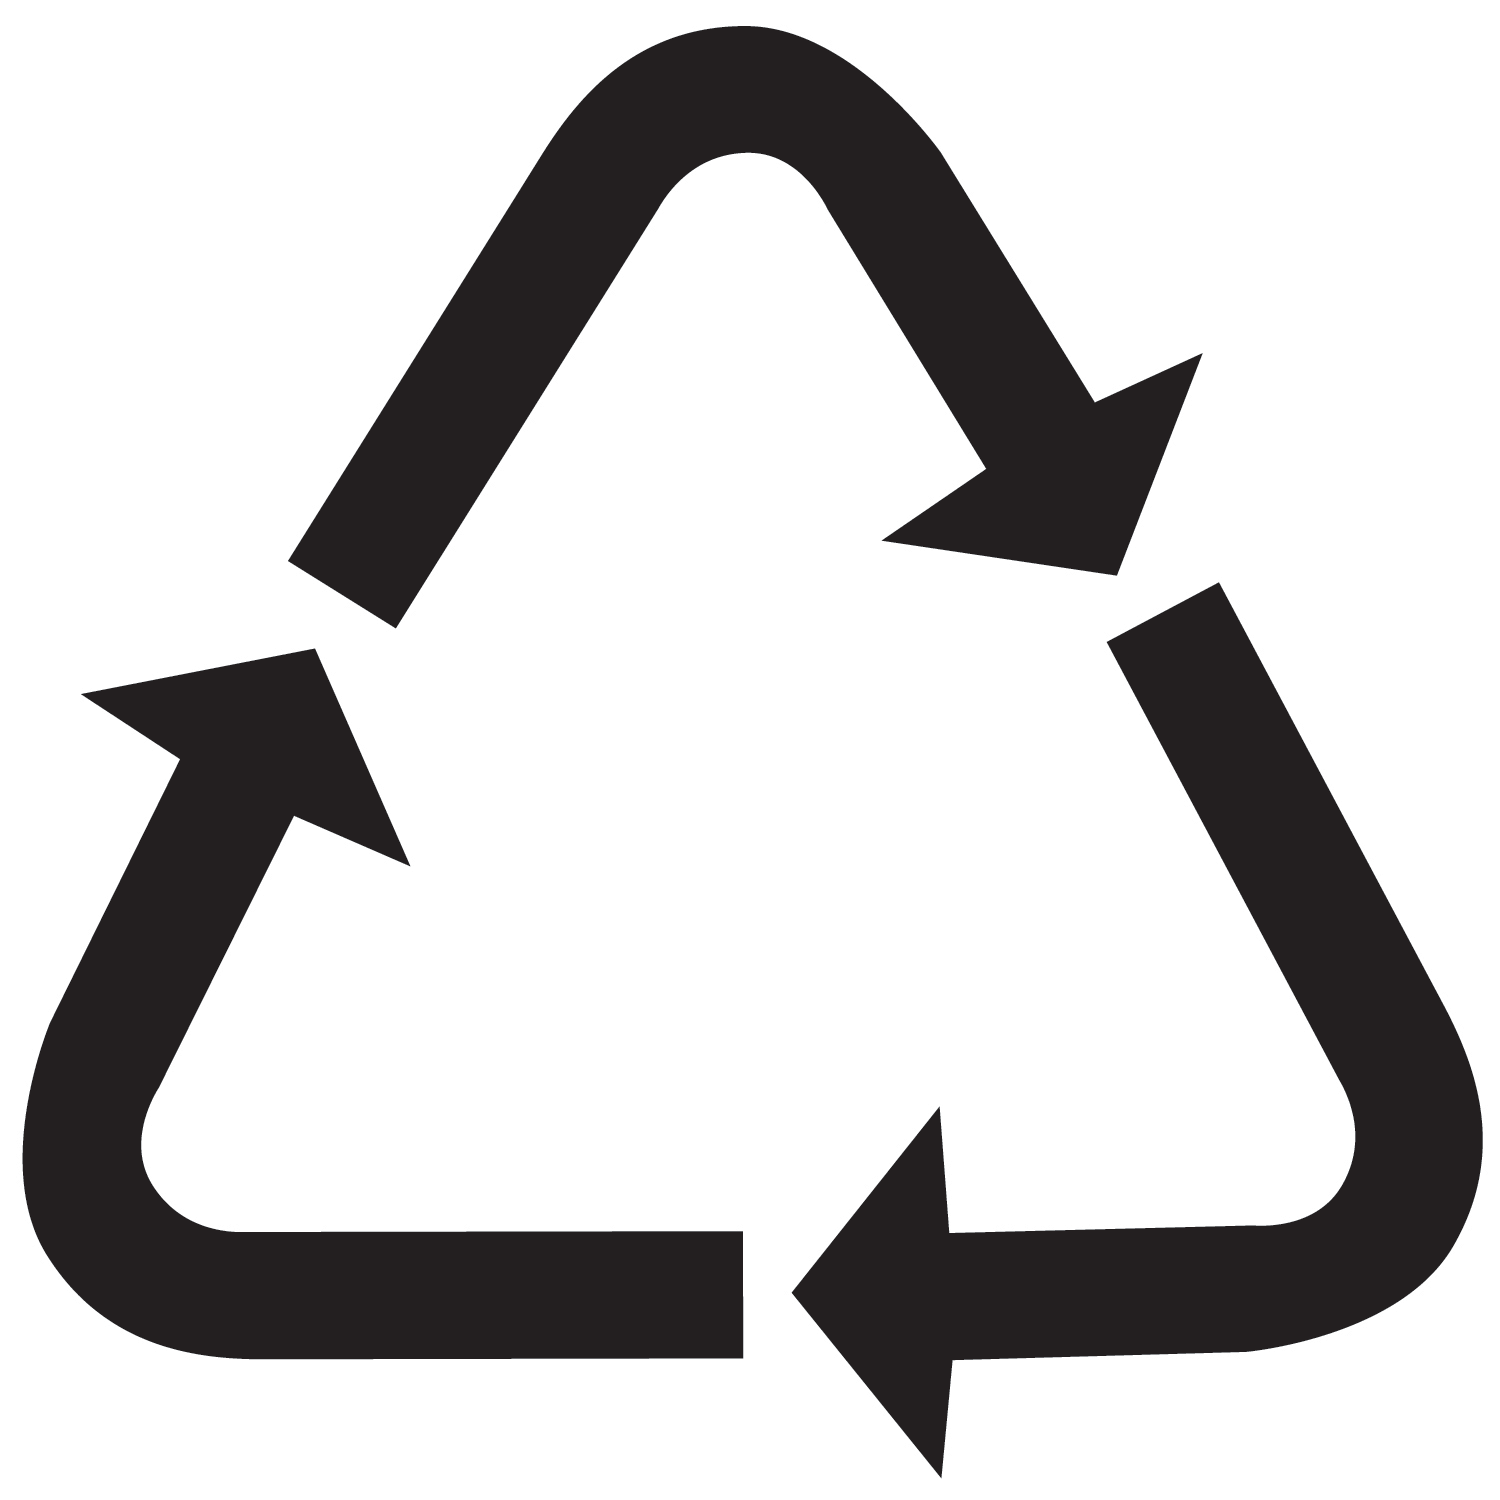 10 Different Styles of Recycling Symbol, Free to Download ...